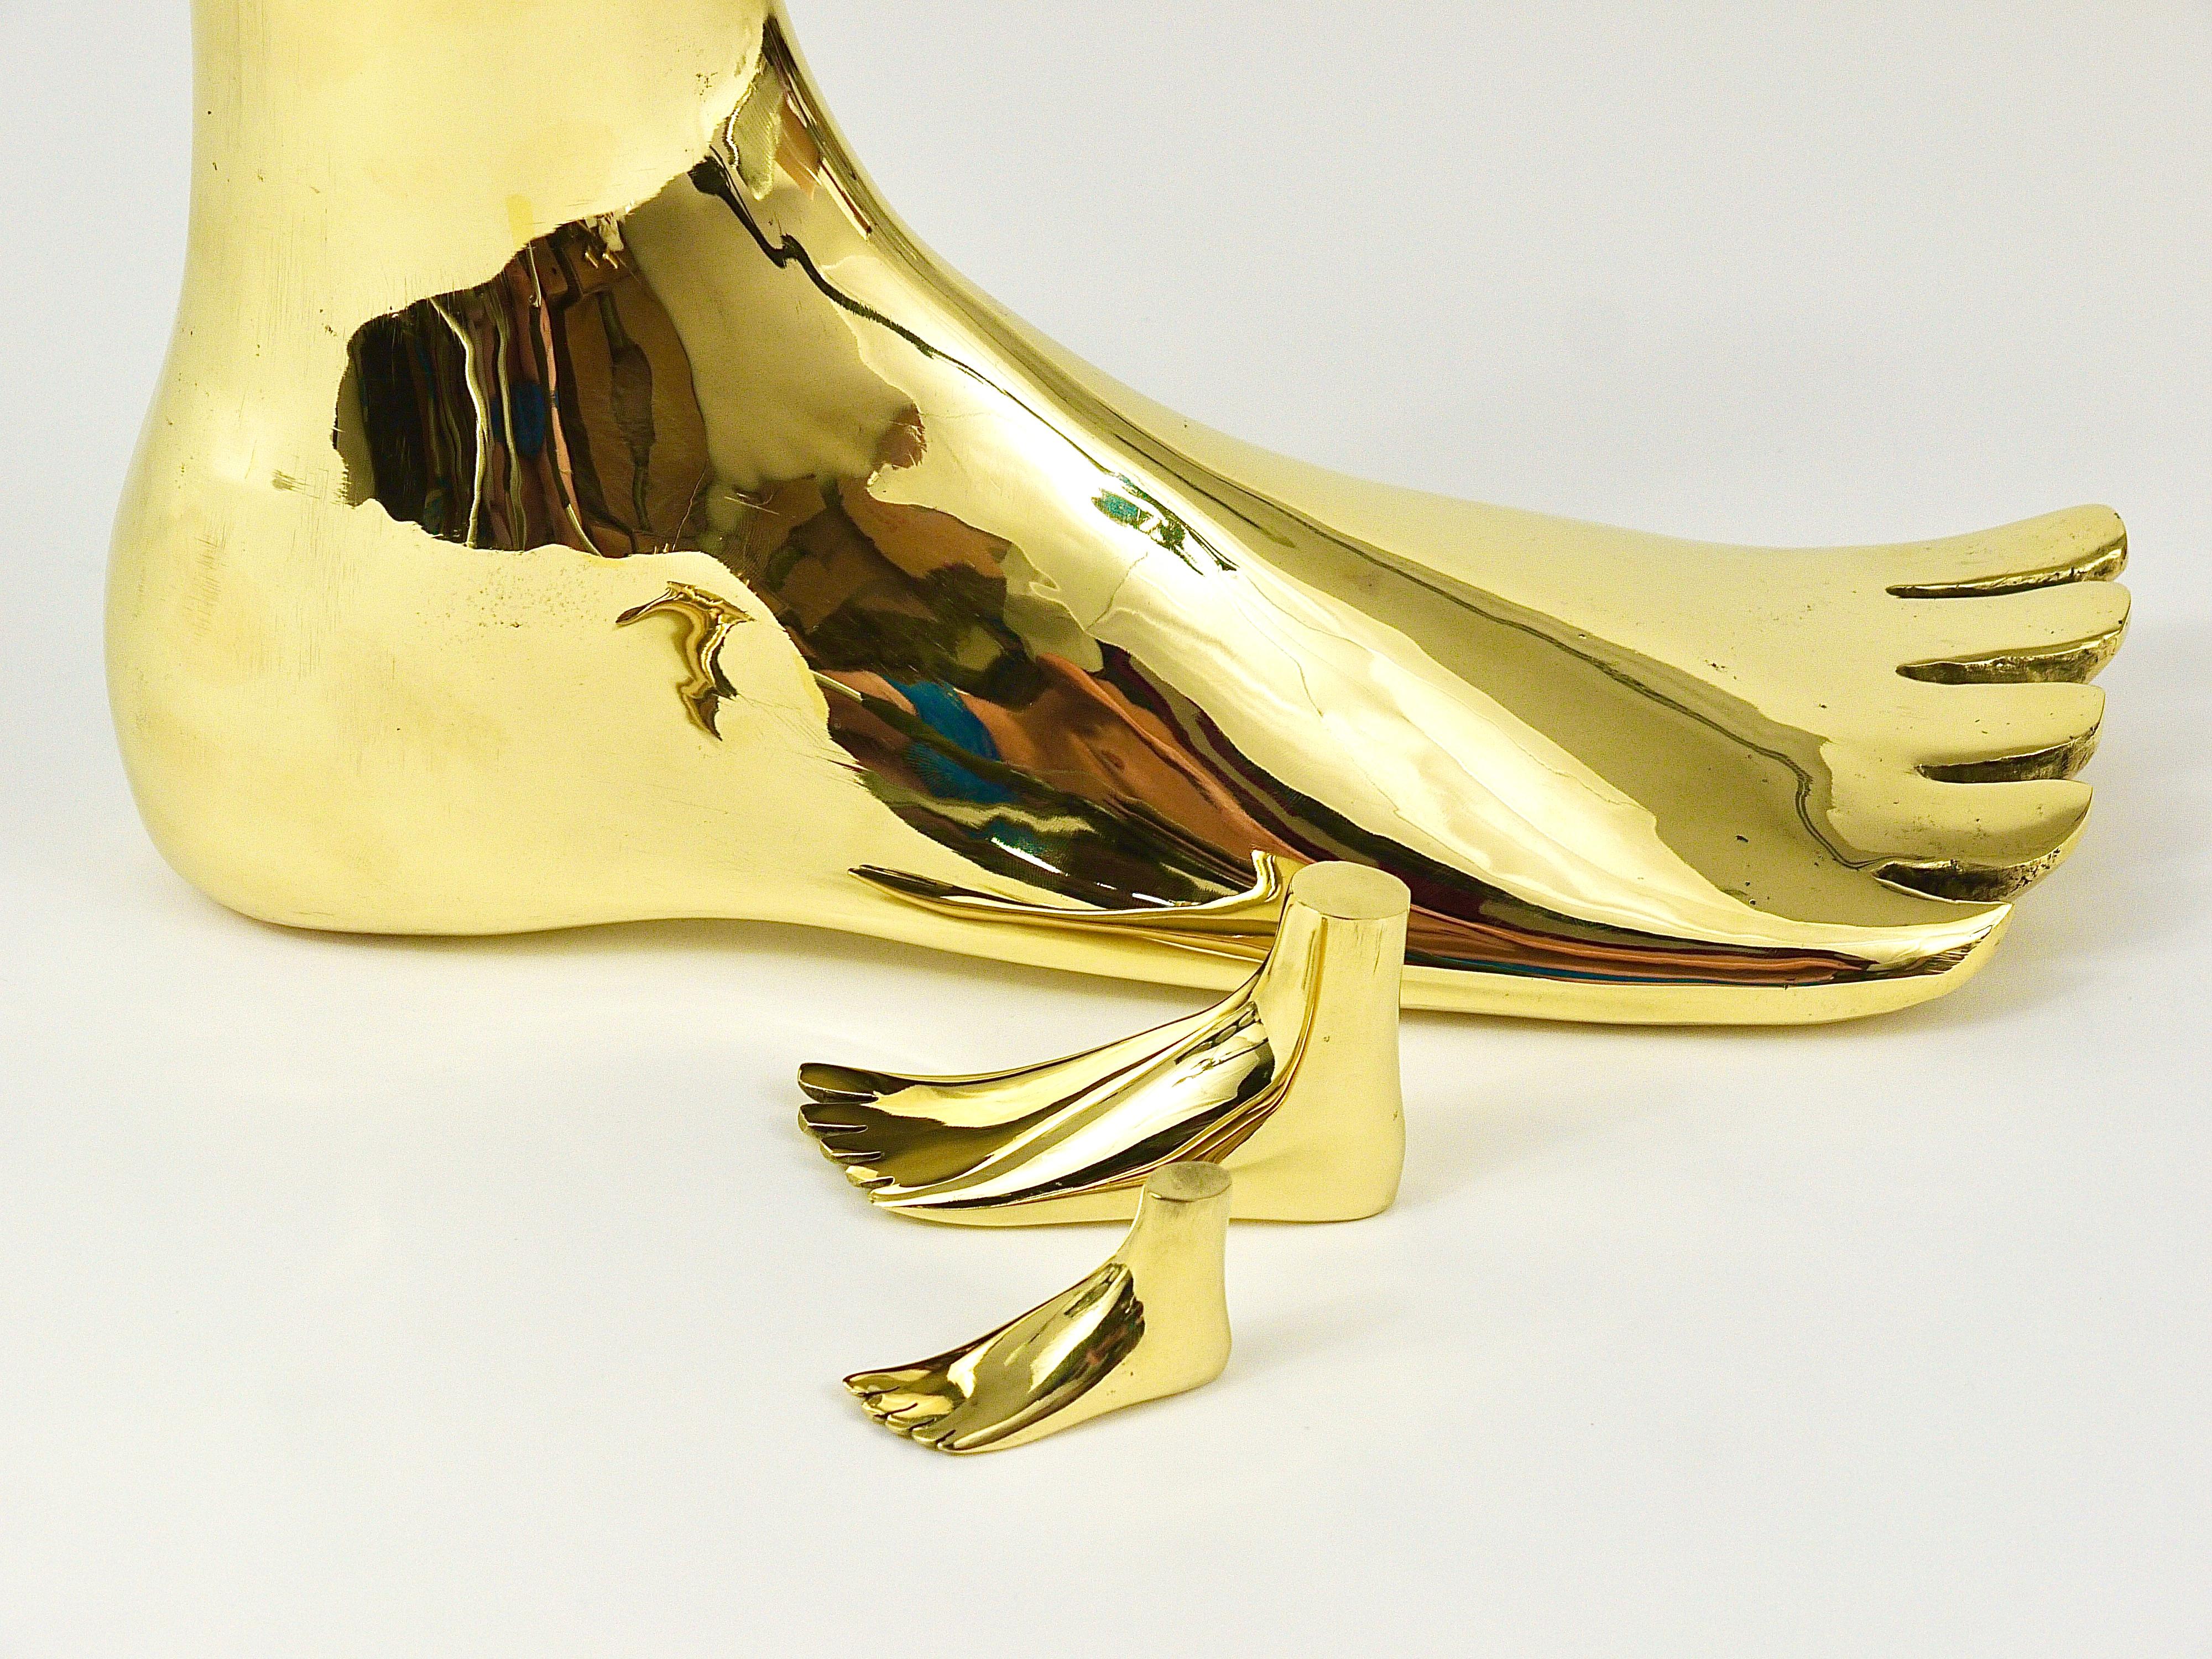 Signed Carl Auböck Midcentury Brass Foot Paperweight Handmade Sculpture For Sale 4